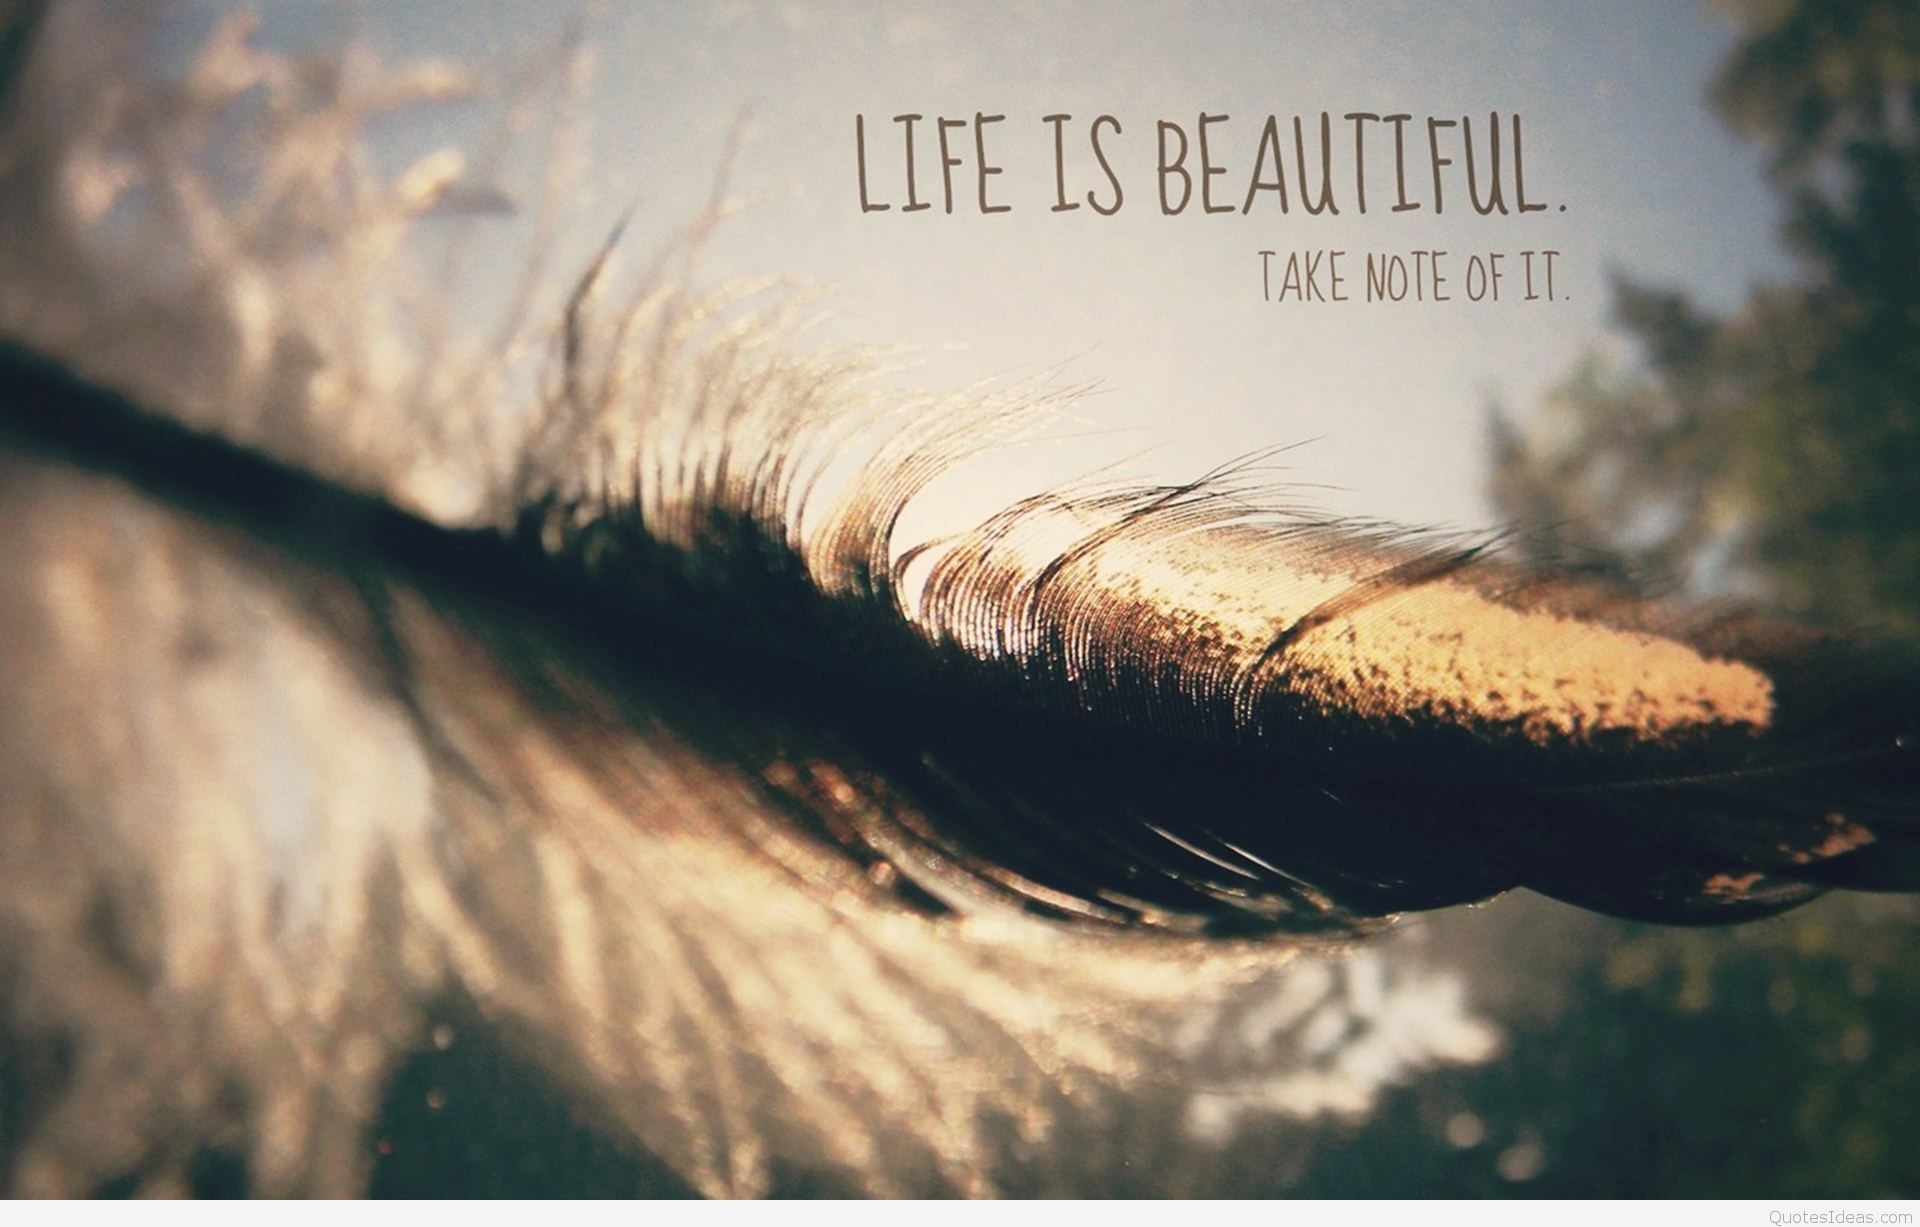 1920x1227 Life is beautiful HD wallpaper with quote